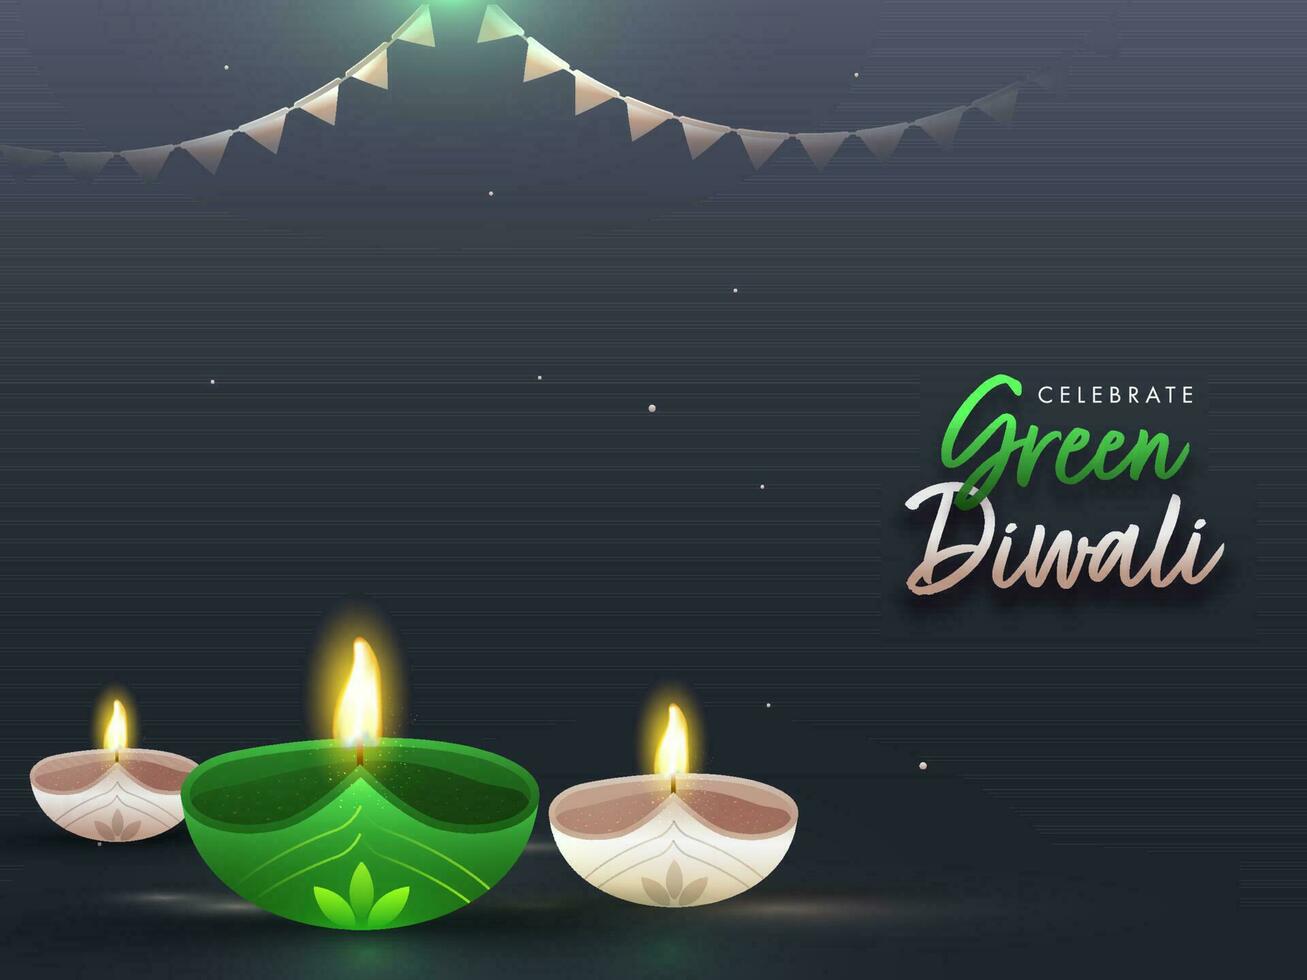 Indian Light Festiva, Happy Diwali Celebration with Illuminated Oil Lamps for Green Diwali Concept on Night Background. vector